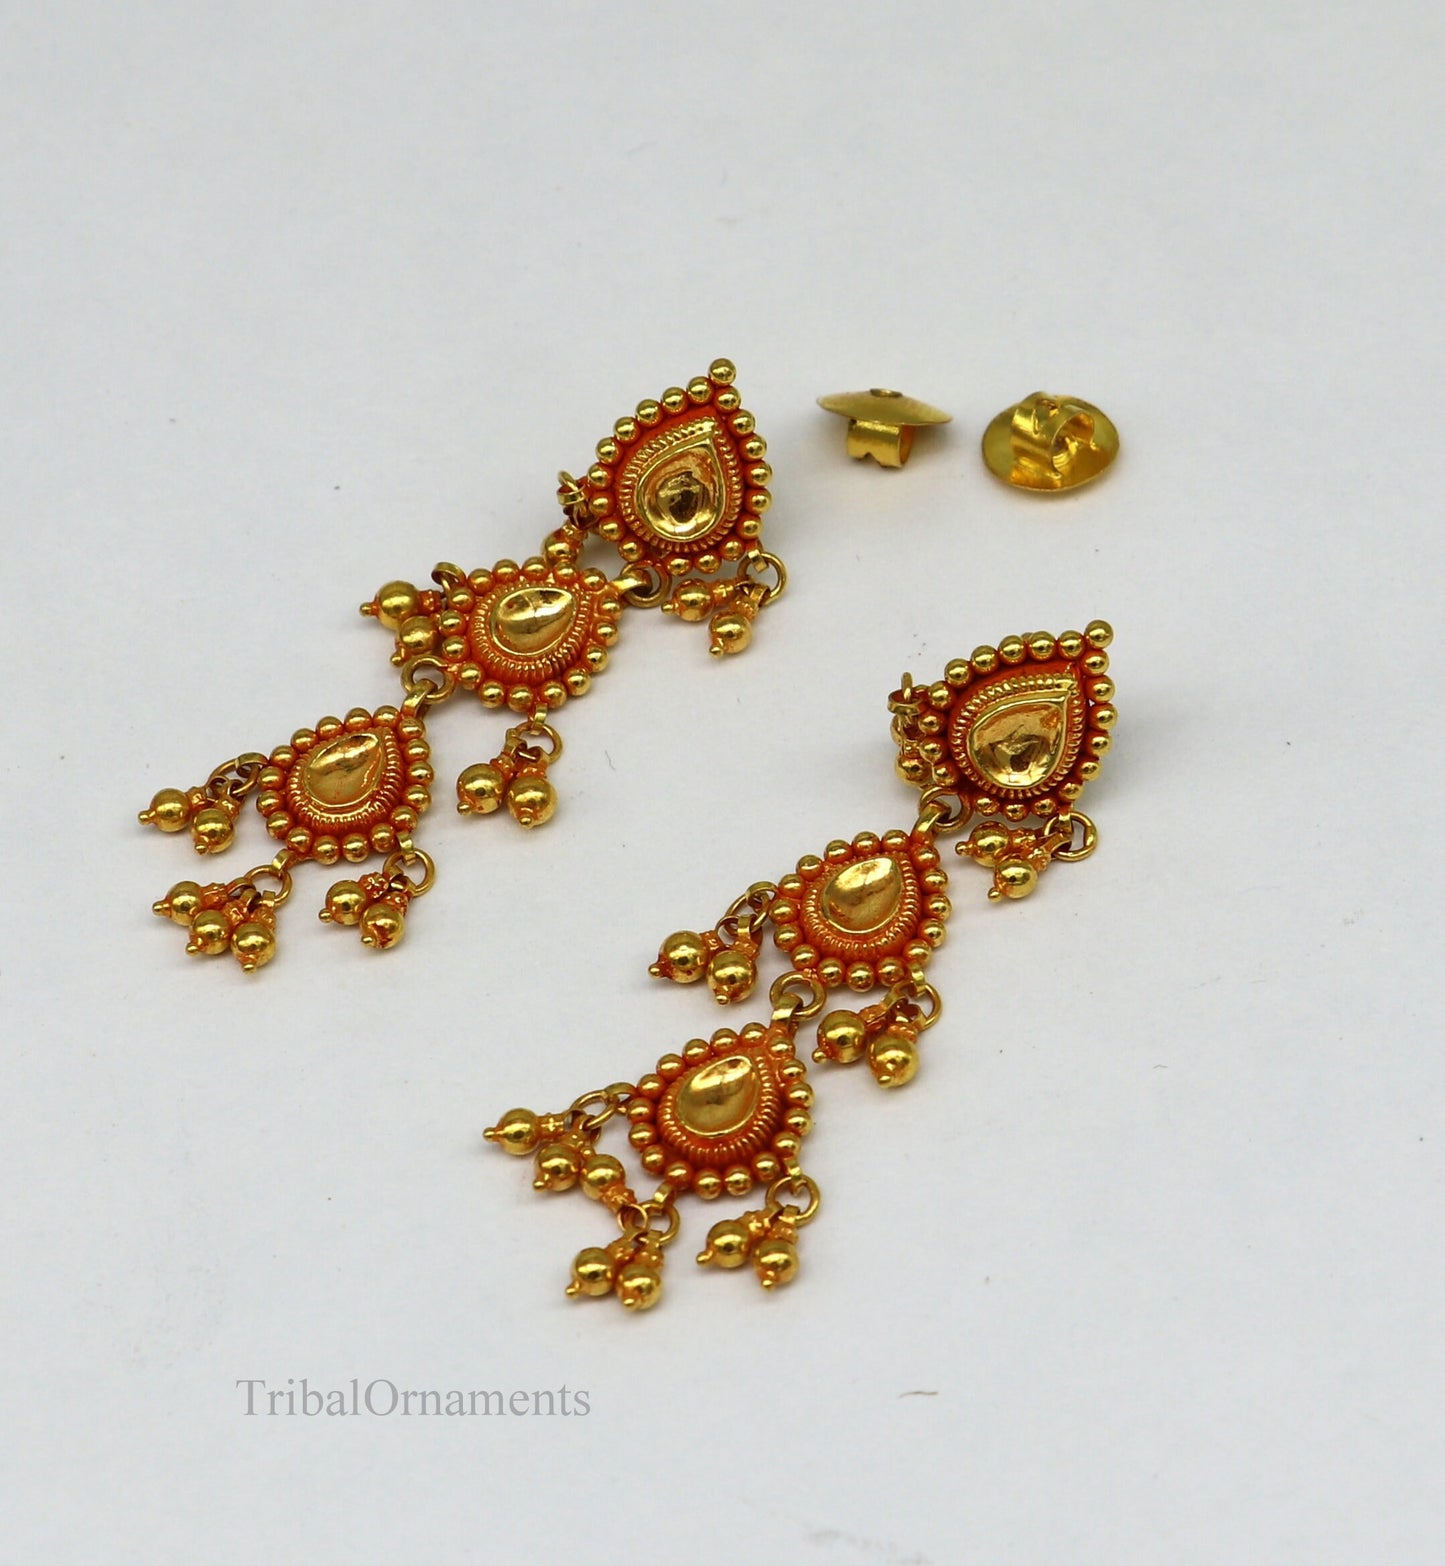 22Kt yellow gold handmade Vintage antique tussi design earring, gorgeous brides gifting stud earring drop dangle wedding jewelry ear130 - TRIBAL ORNAMENTS